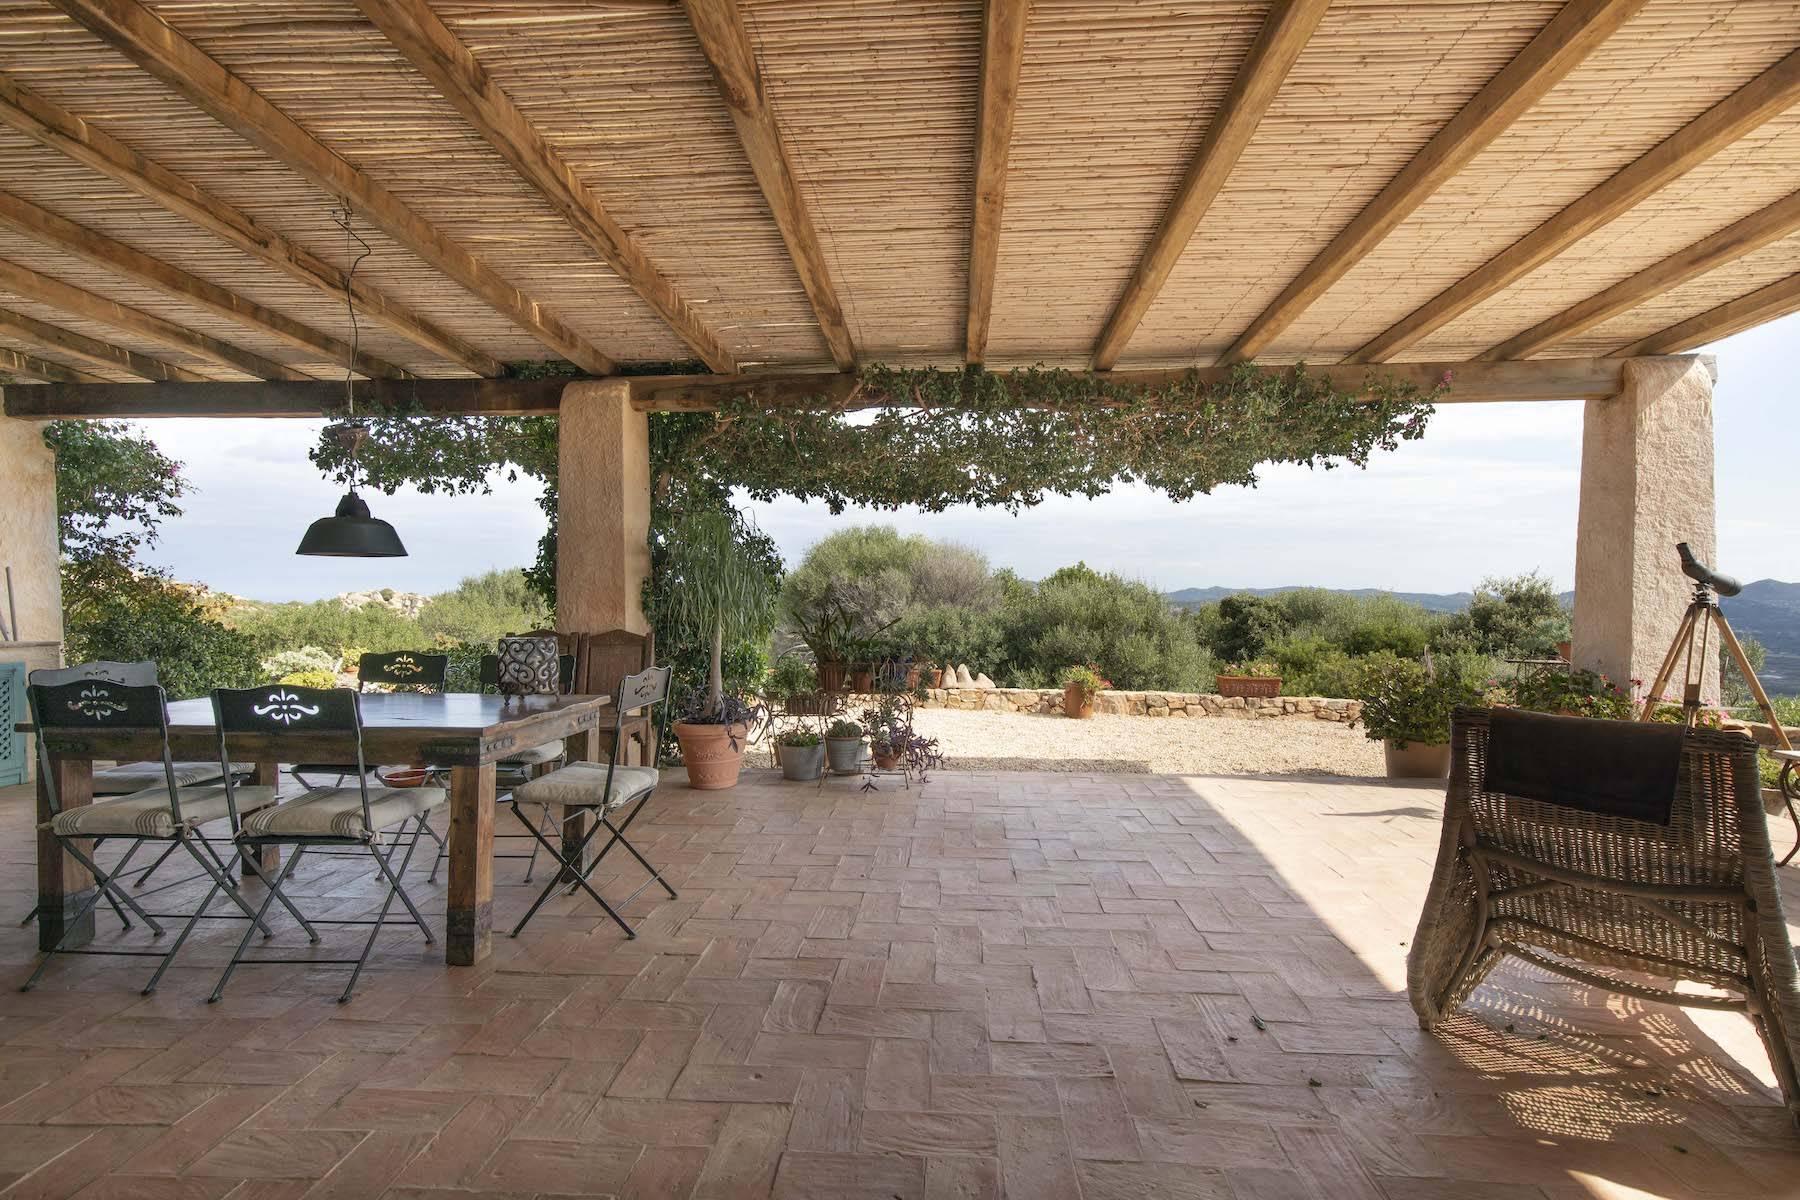 Splendid estate, surrounded by Mediterranean vegetation, overlooking the Gulf of Cannigione - 10